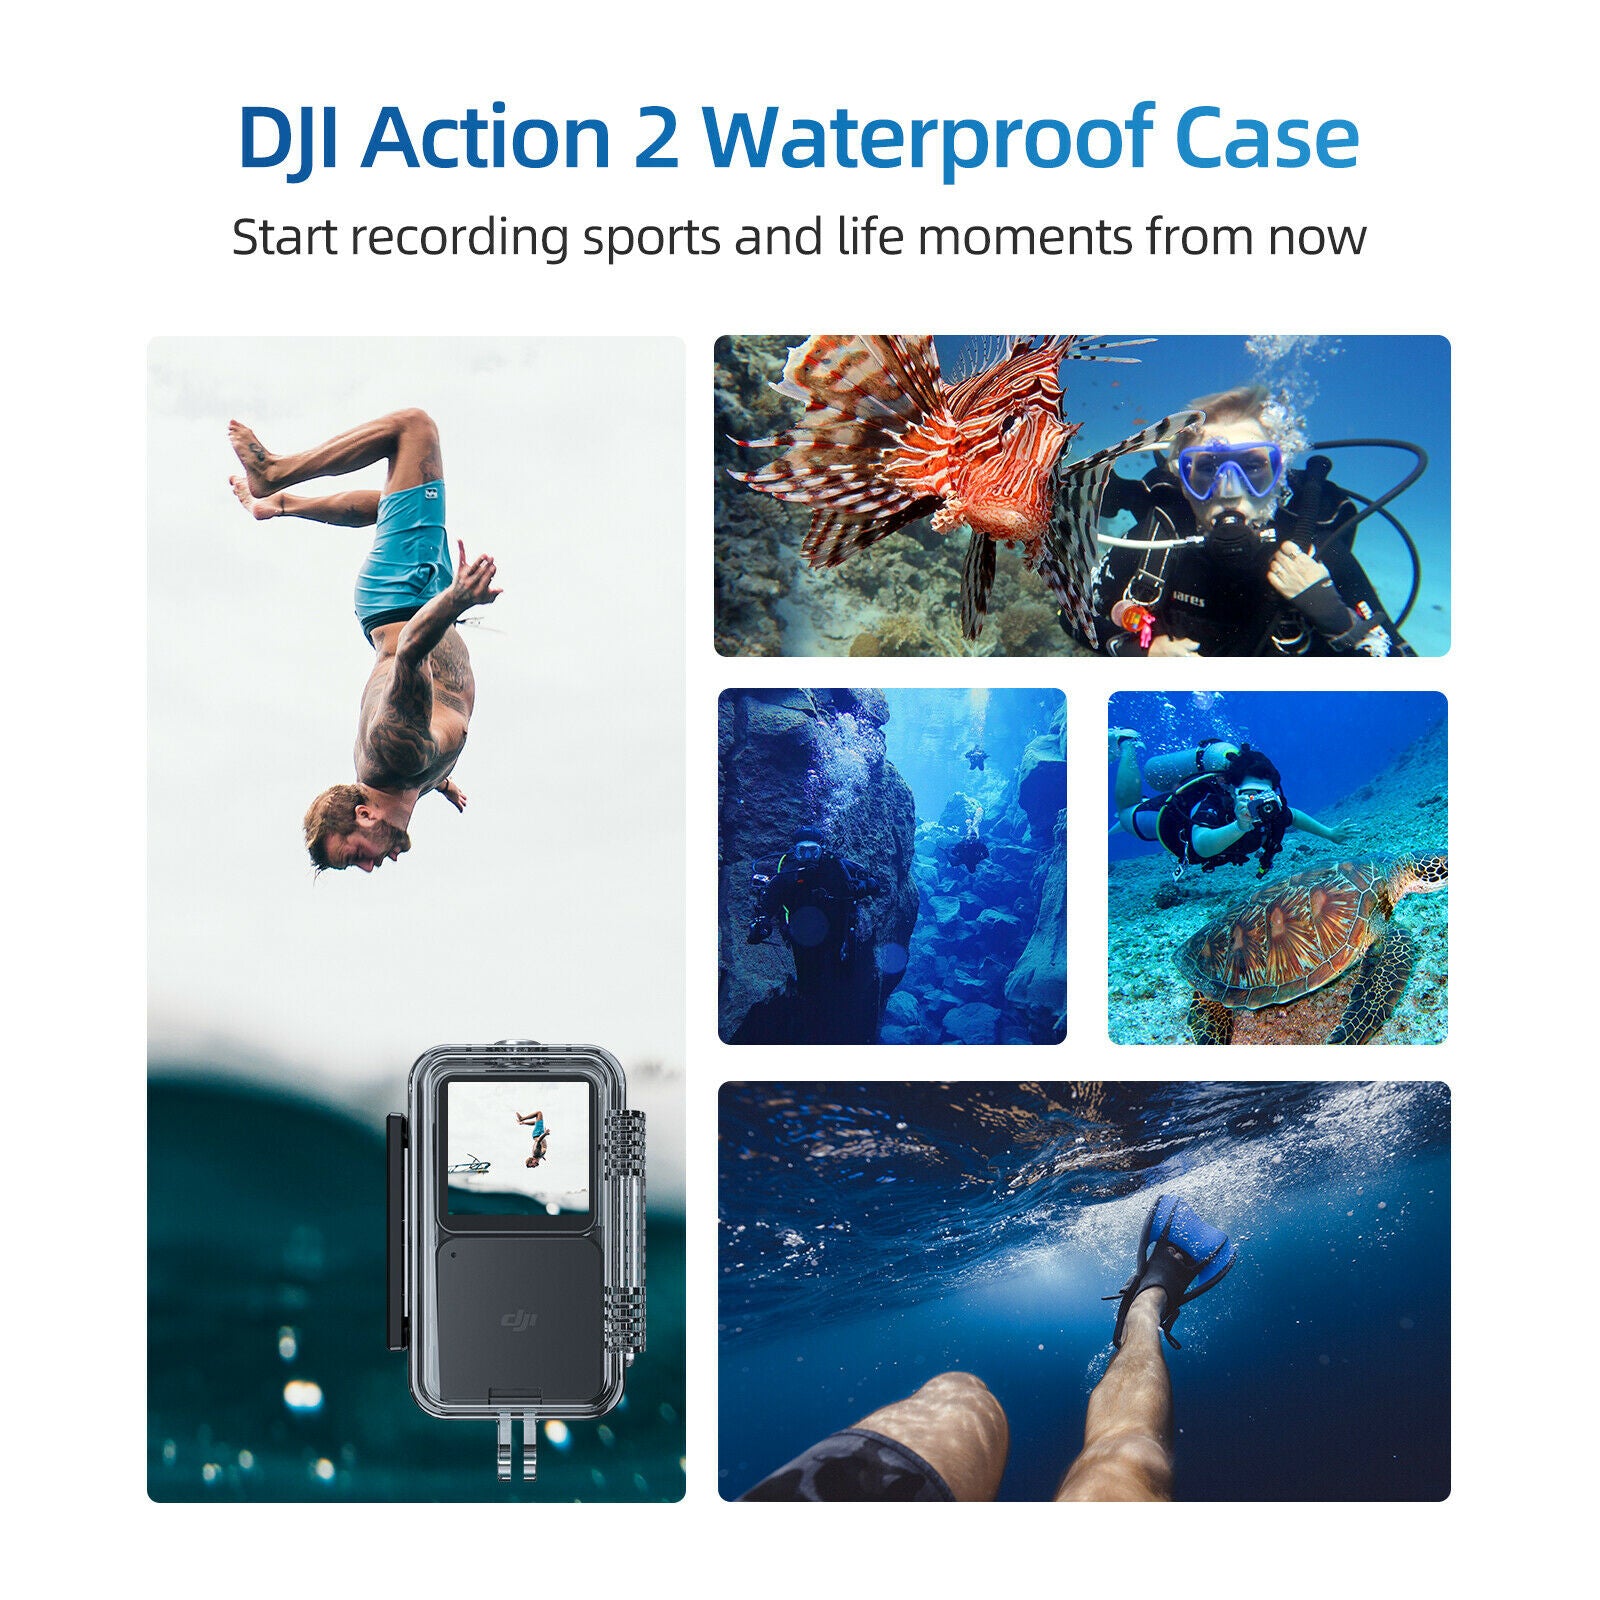 45m Waterproof Diving Housing Case Cover Set For DJI Action 2 Sports Camera New